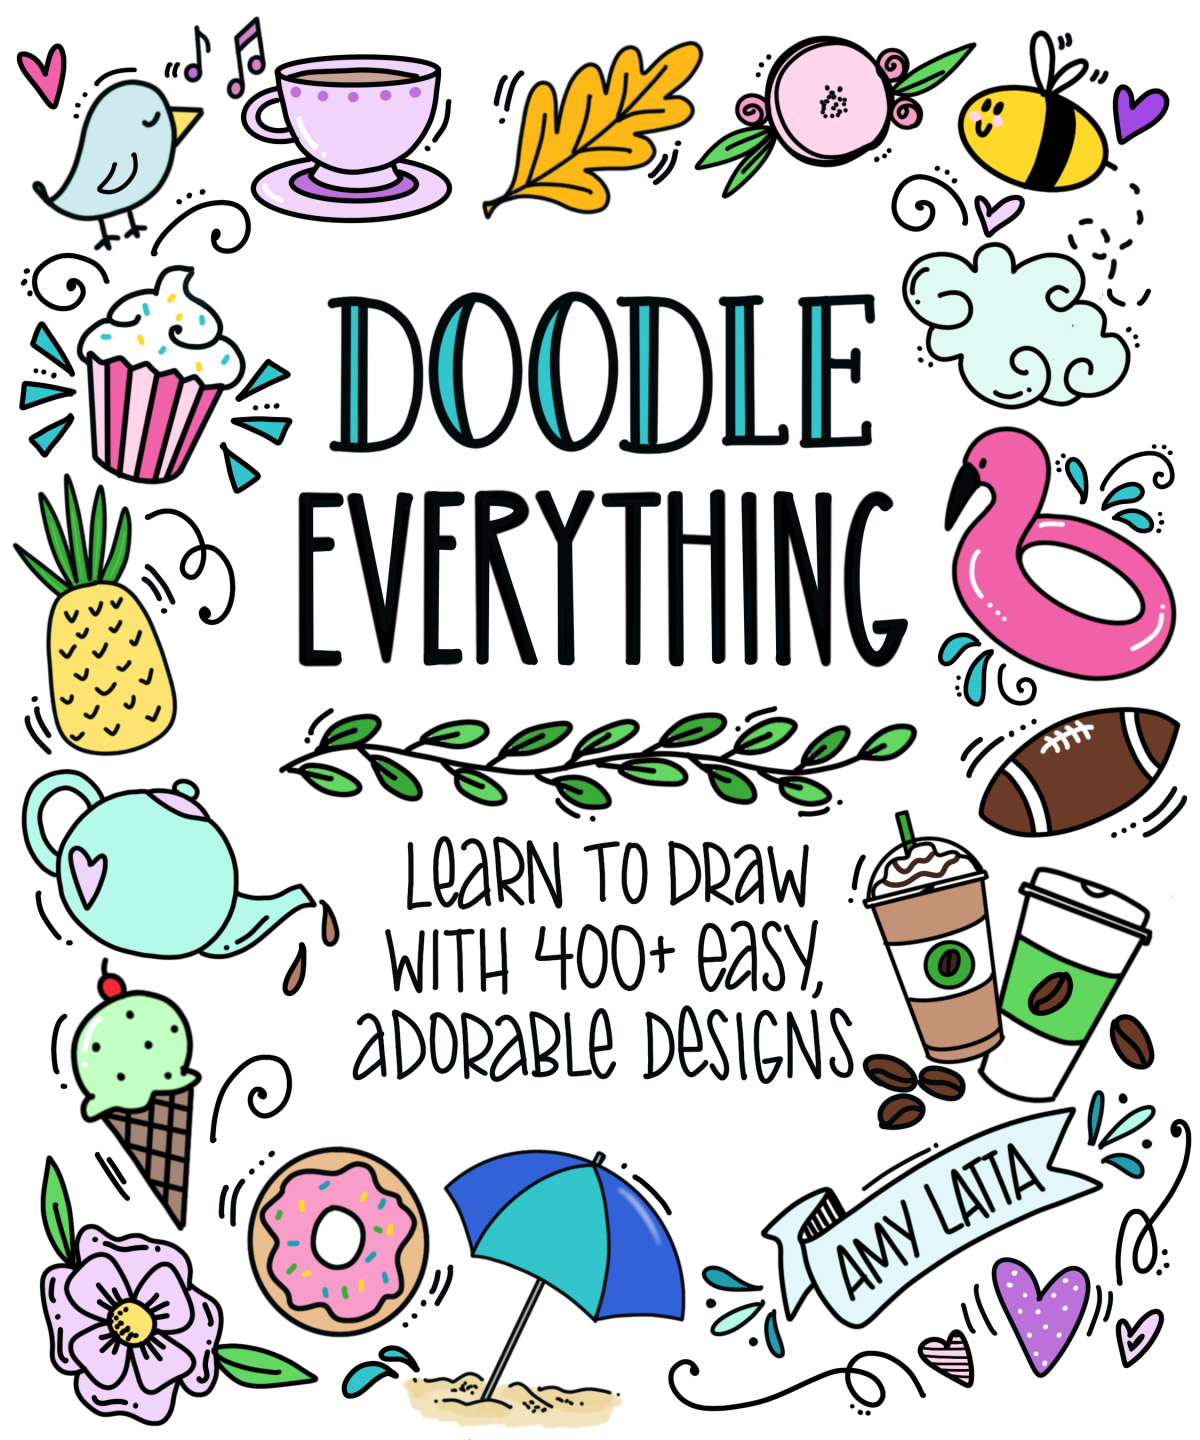 Image is the cover of the book, Doodle Everything, by Amy Latta.